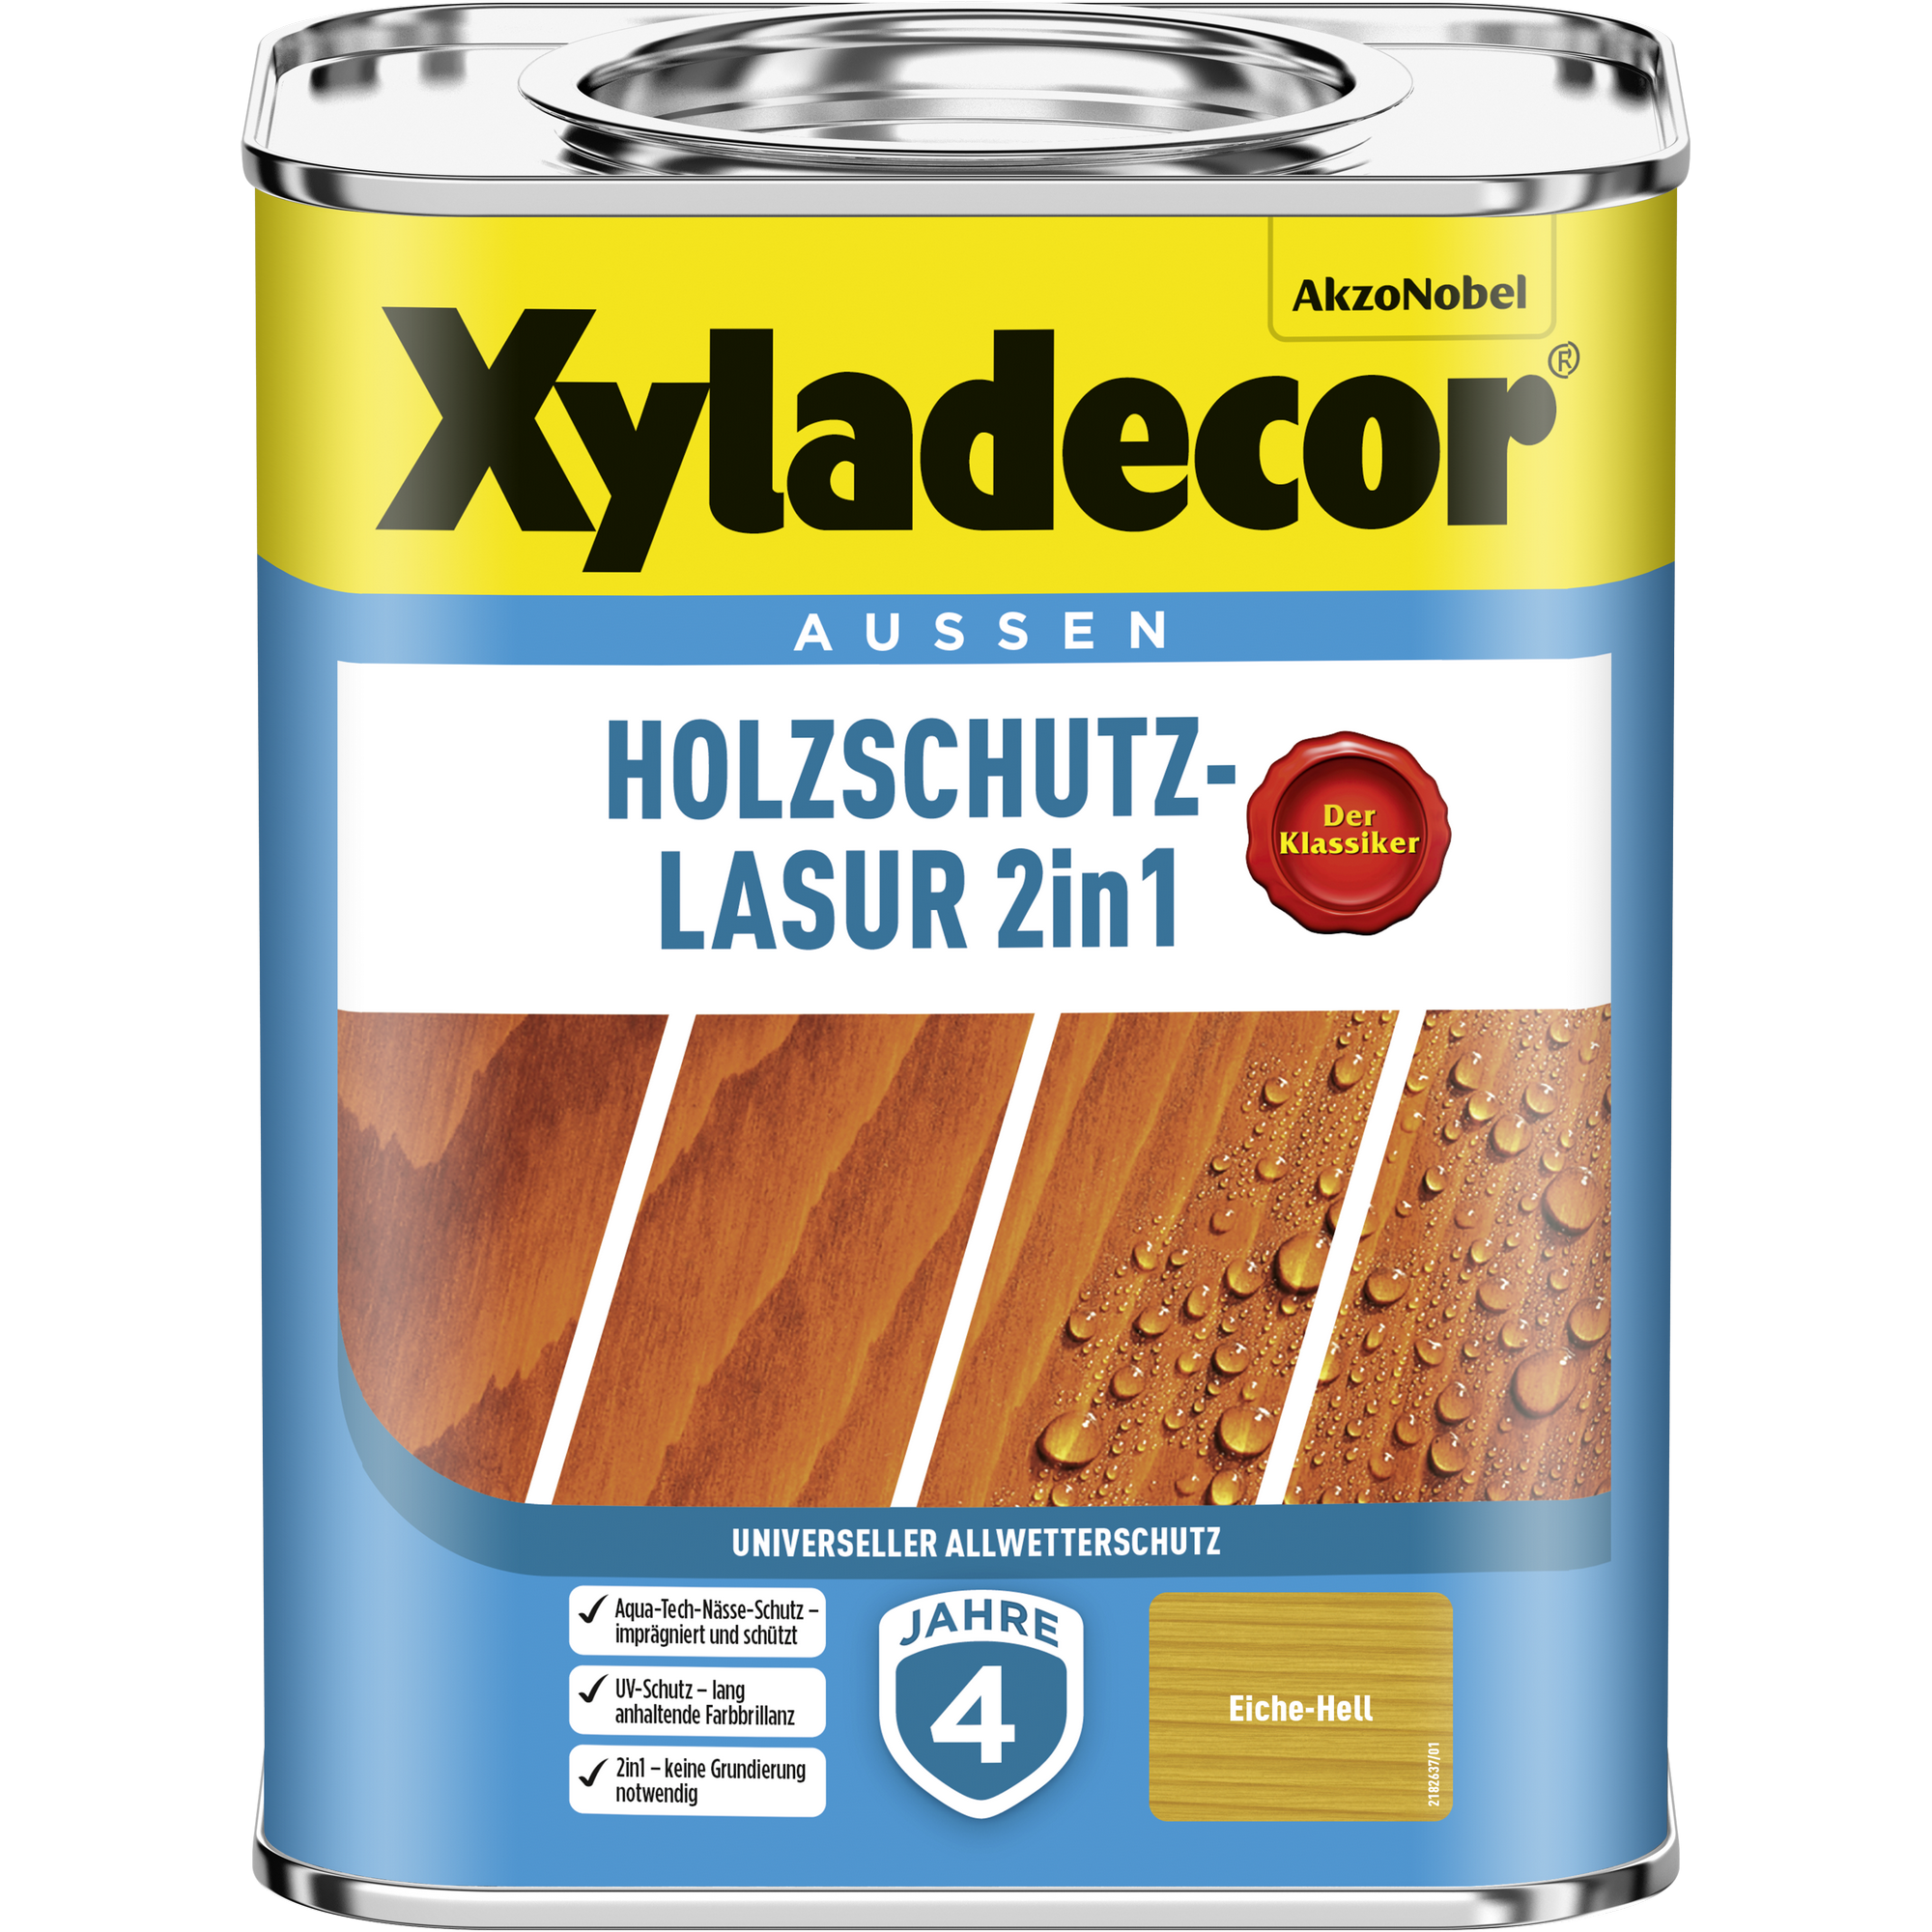 xyladecor holzschutz-lasur 2 in 1 eiche hell